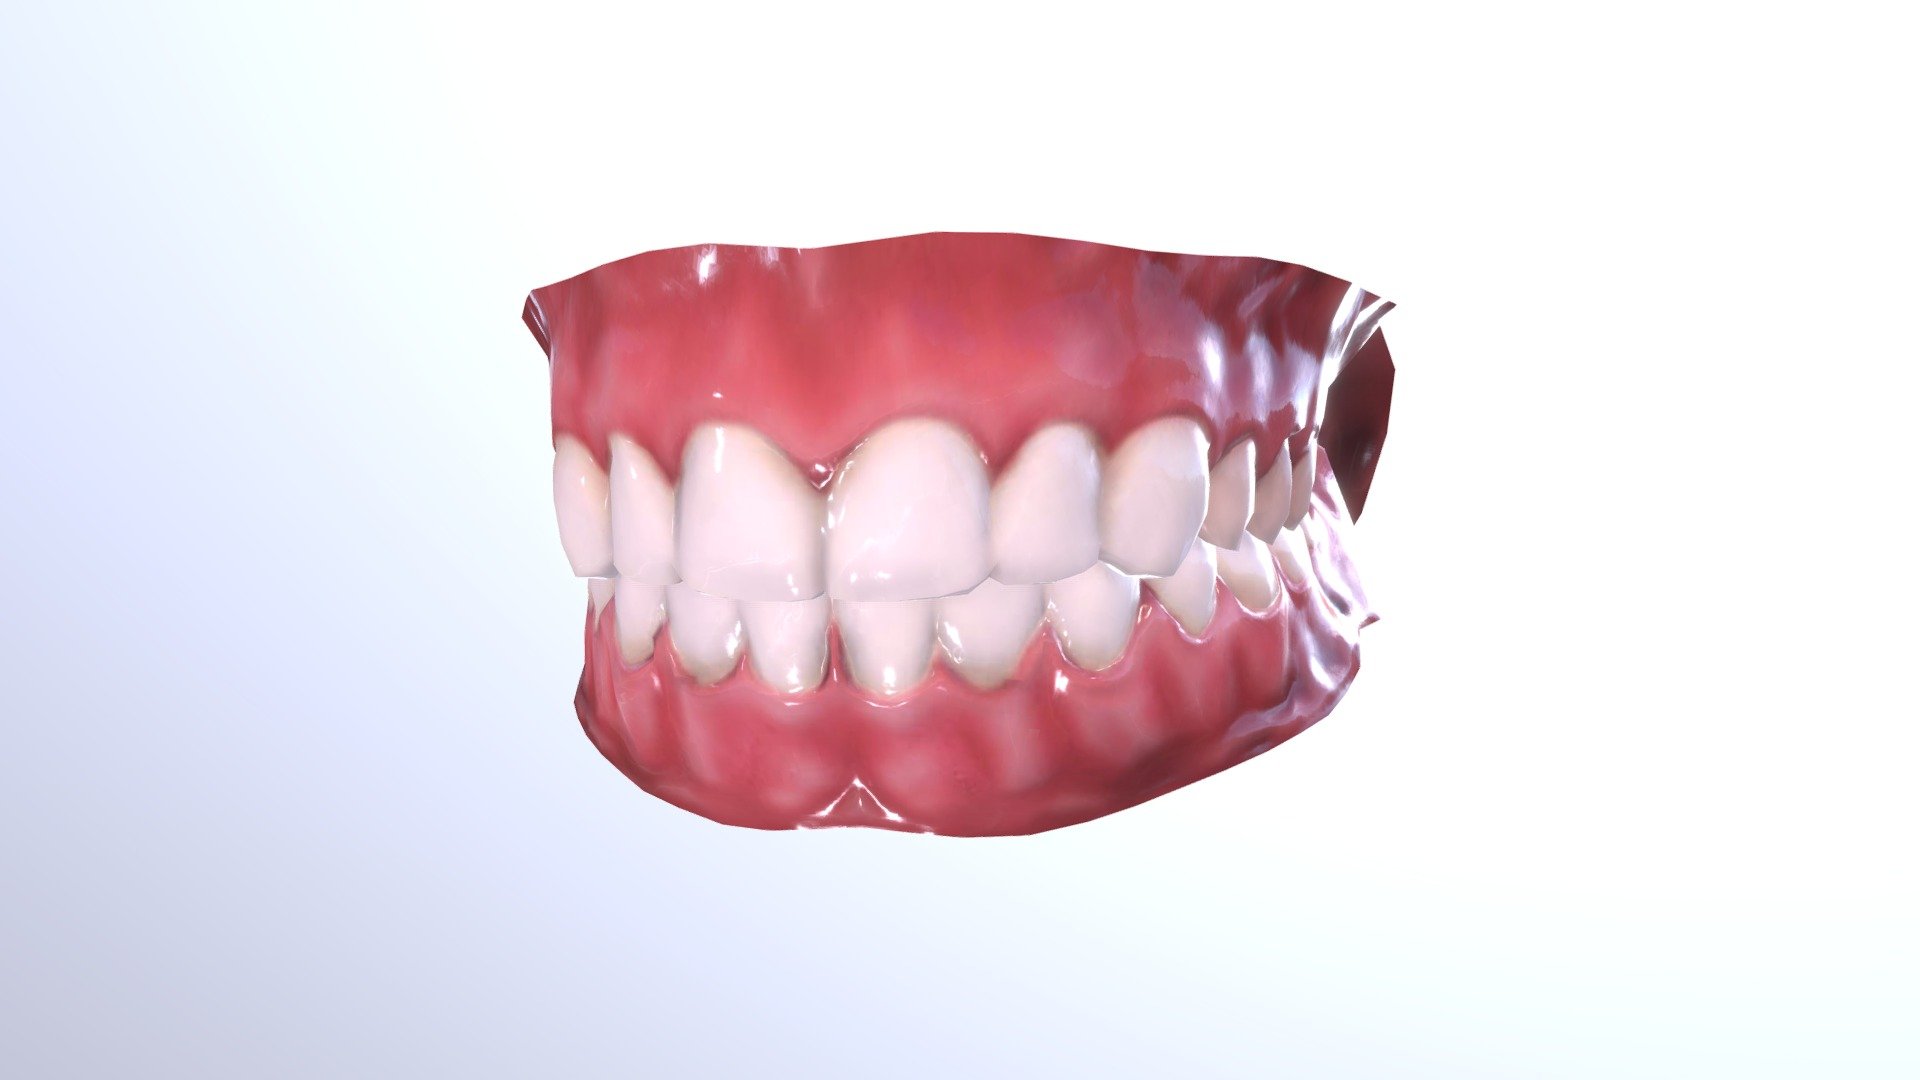 Model information:




This model is low poly, designed for video games.

FBX

Weight - 200 kb

Polygons (squares) - 2600

Vertices - 2500

Teeth and Gums are one-piece mesh.

Textures:




JPG | TGA

Total Weight - 400 kb | 30 mb

[2048x2048]

PBR (BaseColor + Metallic + Roughness + Normal + AO)

Internal blackout baked into BaseColor

Animation:




Universal bone rigging

Correct pivot, to easy open mouth

Tongue separately

 - Mouth Teeth for Game Character Low-poly - 3D model by Zelad (@zelad3d) 3d model